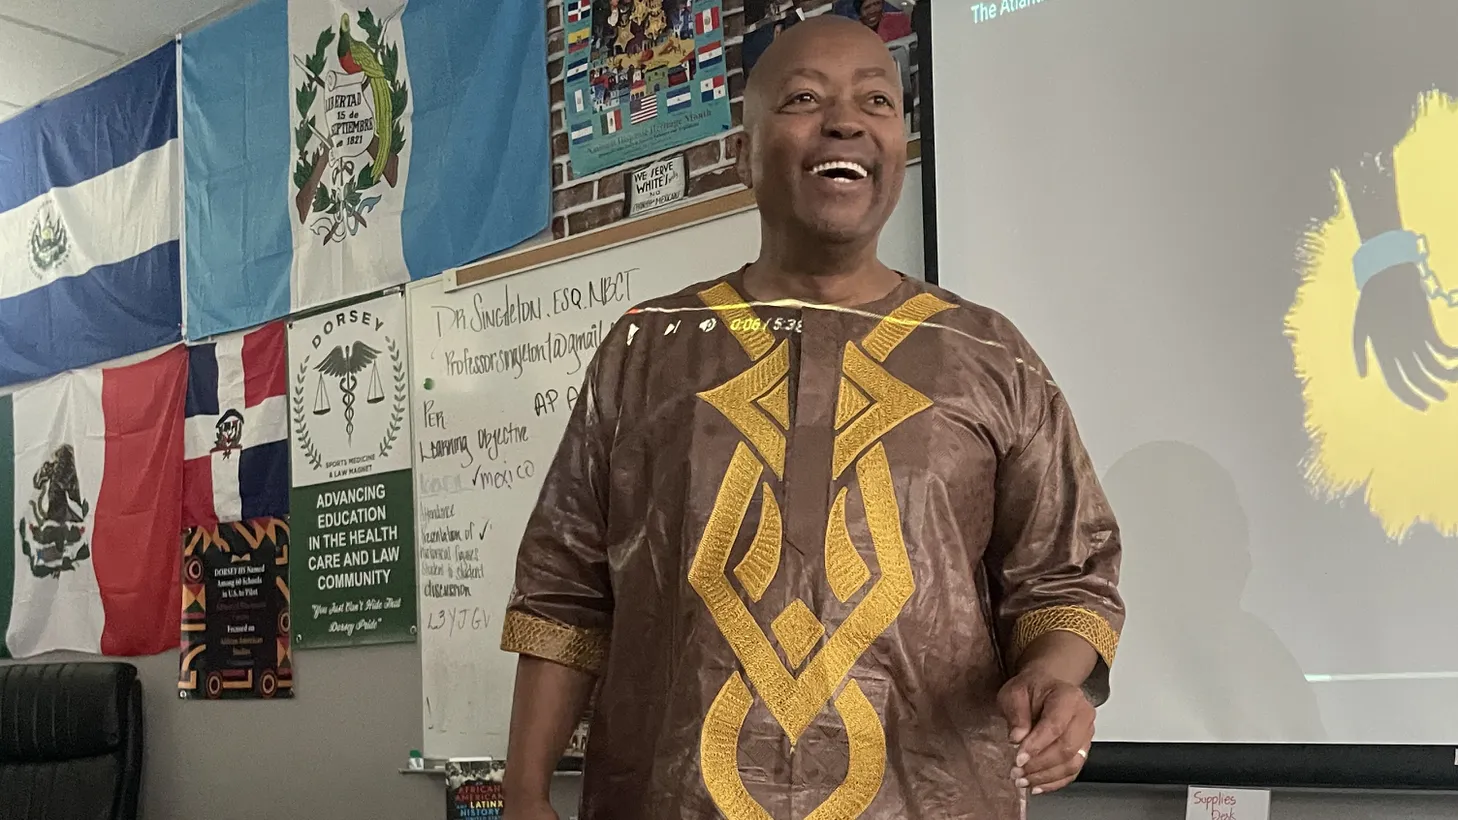 “For millions and millions of young people, Africa is born in them, yet they see nothing in the curriculum that reflects them,” says Donald Singleton, the AP African American Studies teacher at Susan Miller Dorsey Senior High.